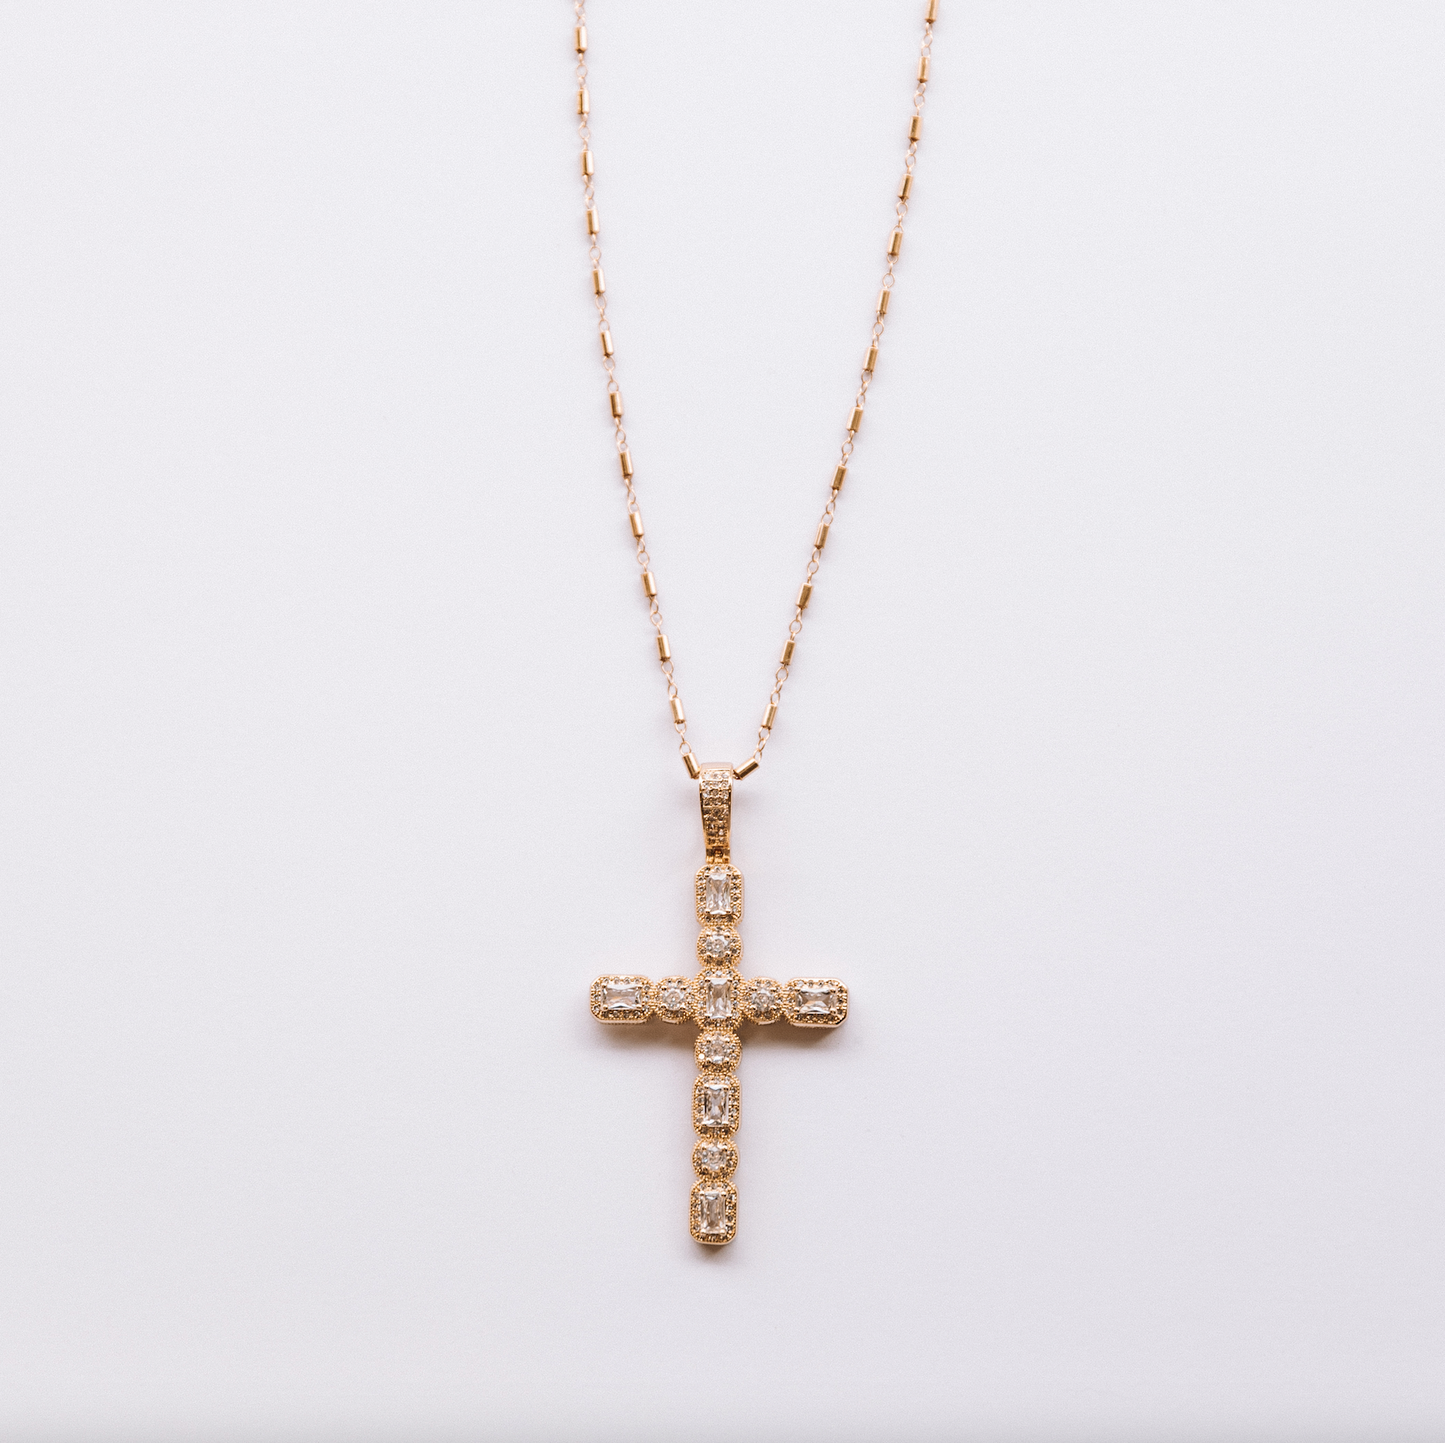 The Callie Cross Necklace